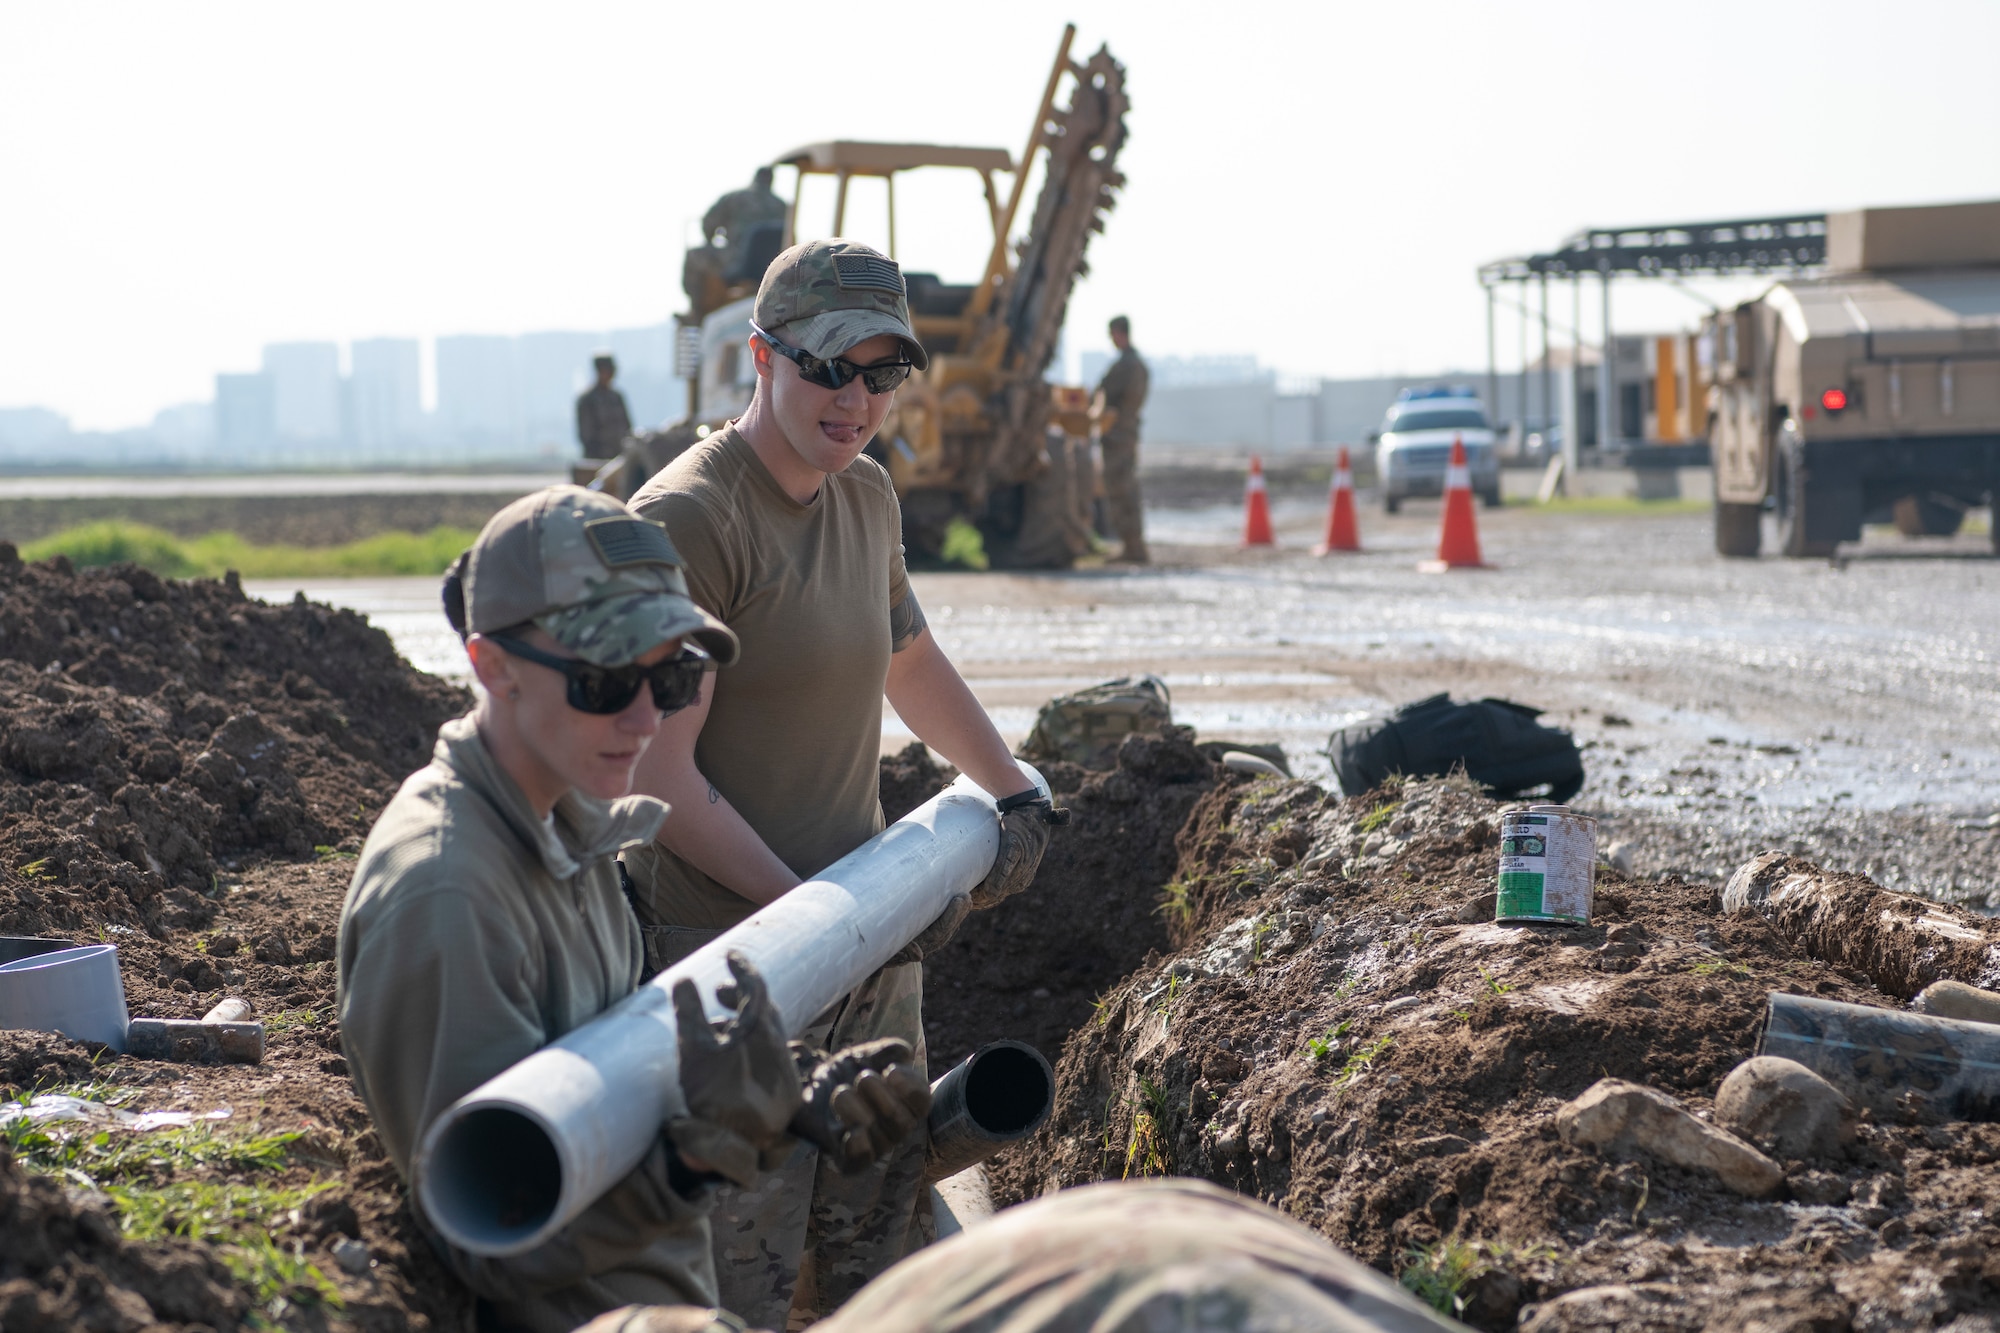 387 AES JET/IA Airmen Provide Contracting, E&I Support in Iraq